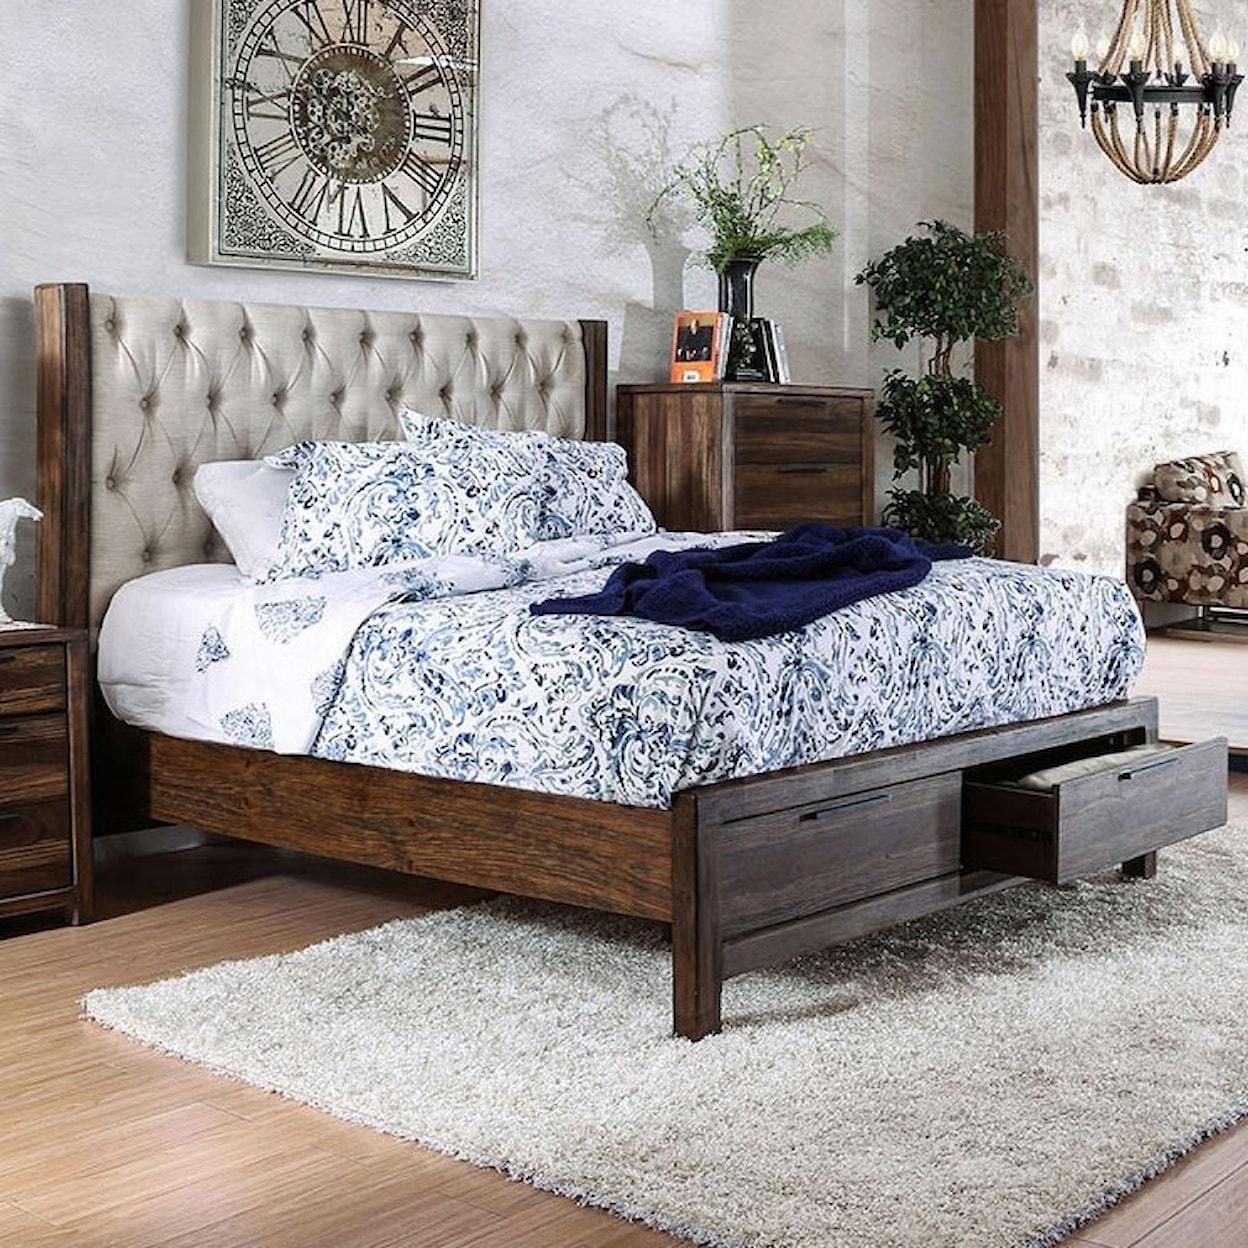 Furniture of America Hutchinson King Storage Bed